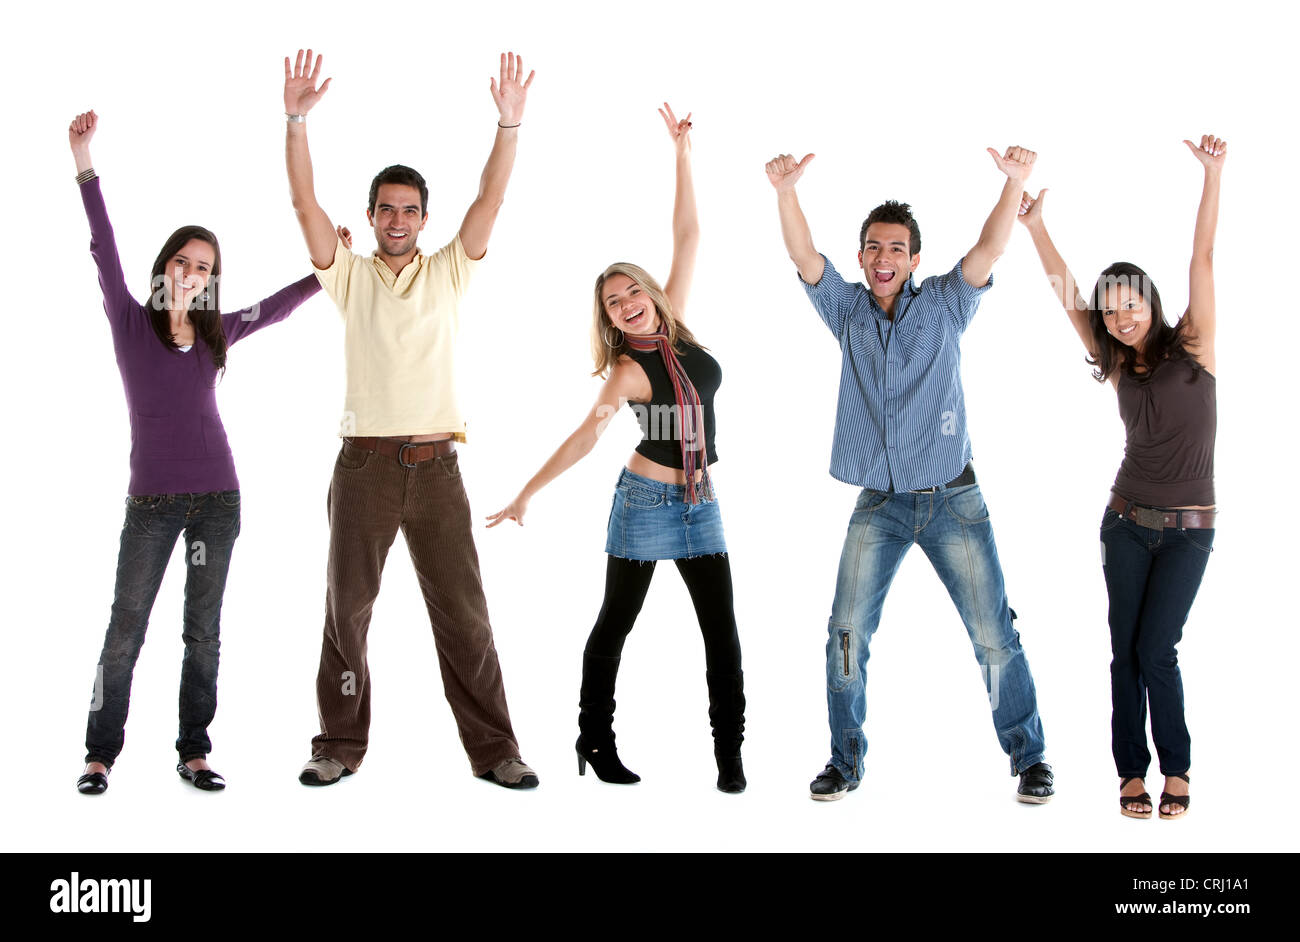 five young people in casual clothing standing side by side cheerfully throwing their arms into the air Stock Photo